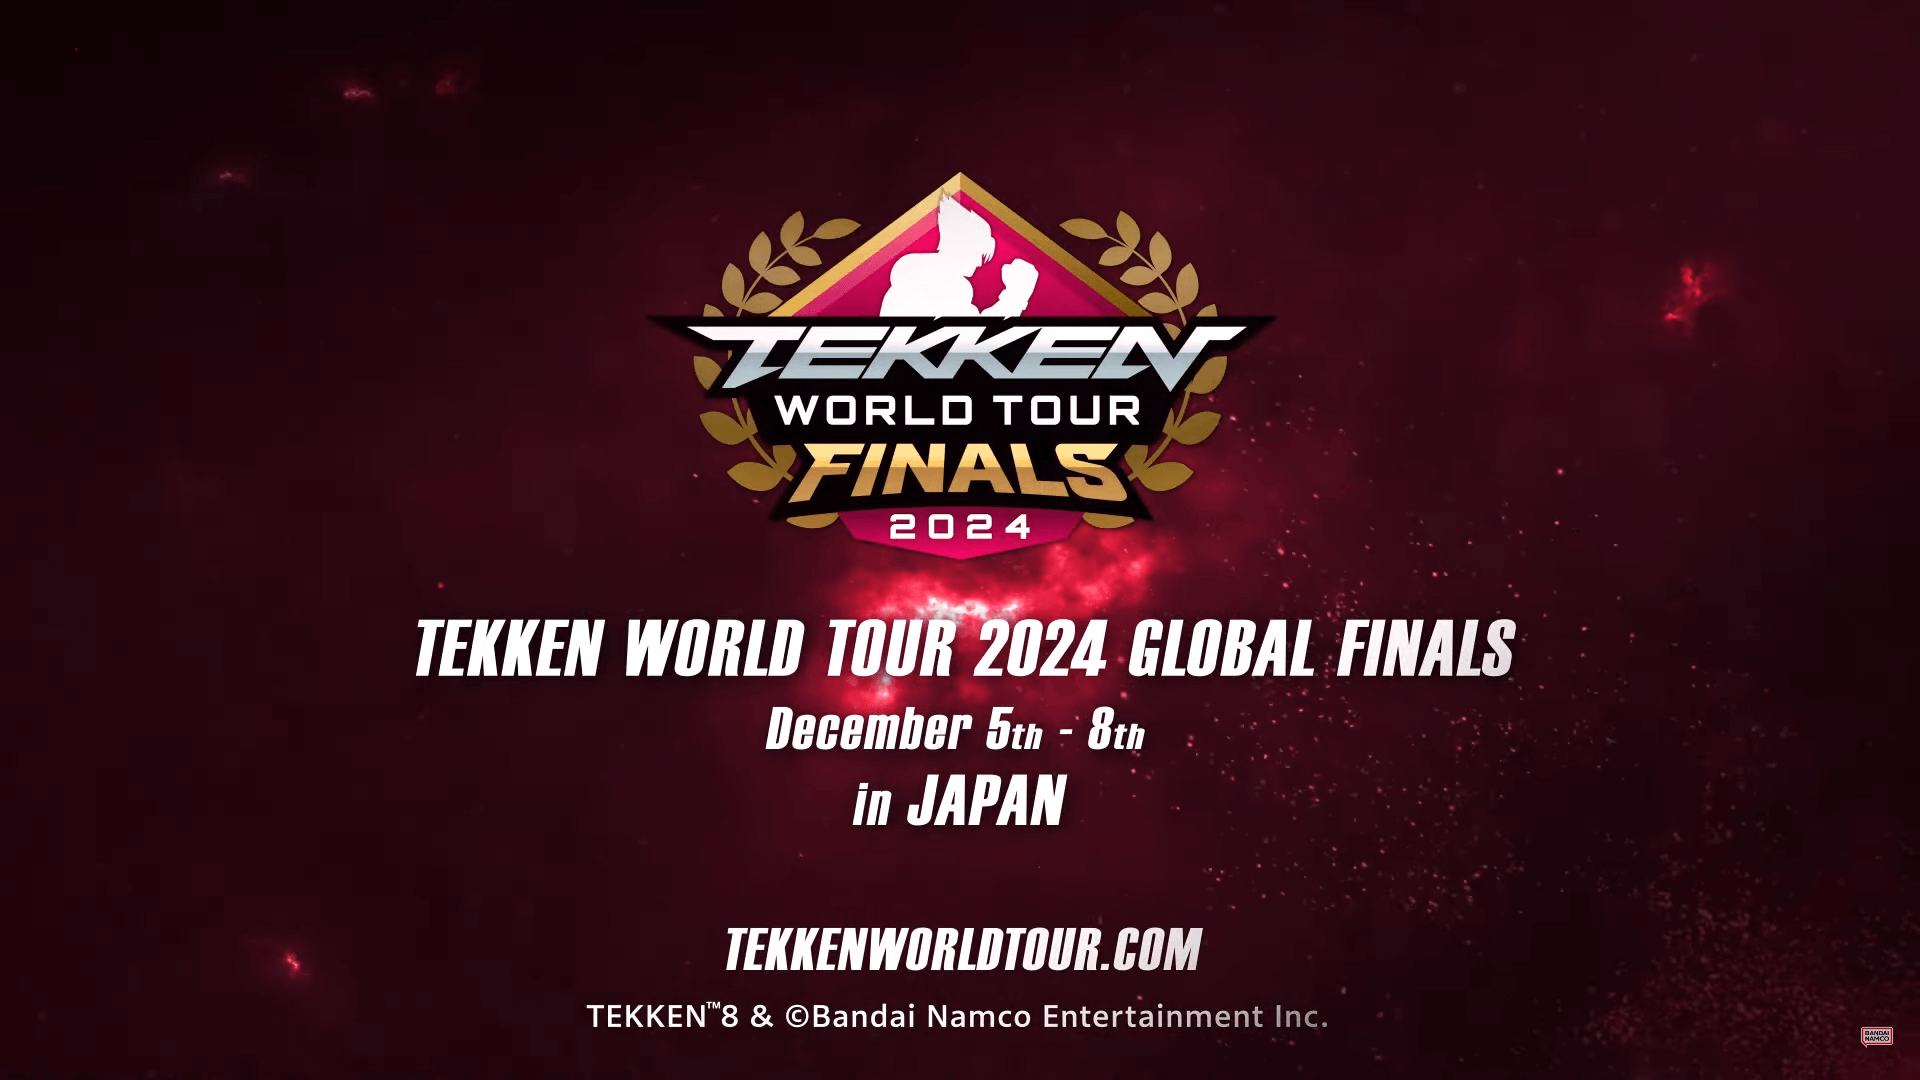 Tekken World Tour Finals Trailer - For the First Time in Japan